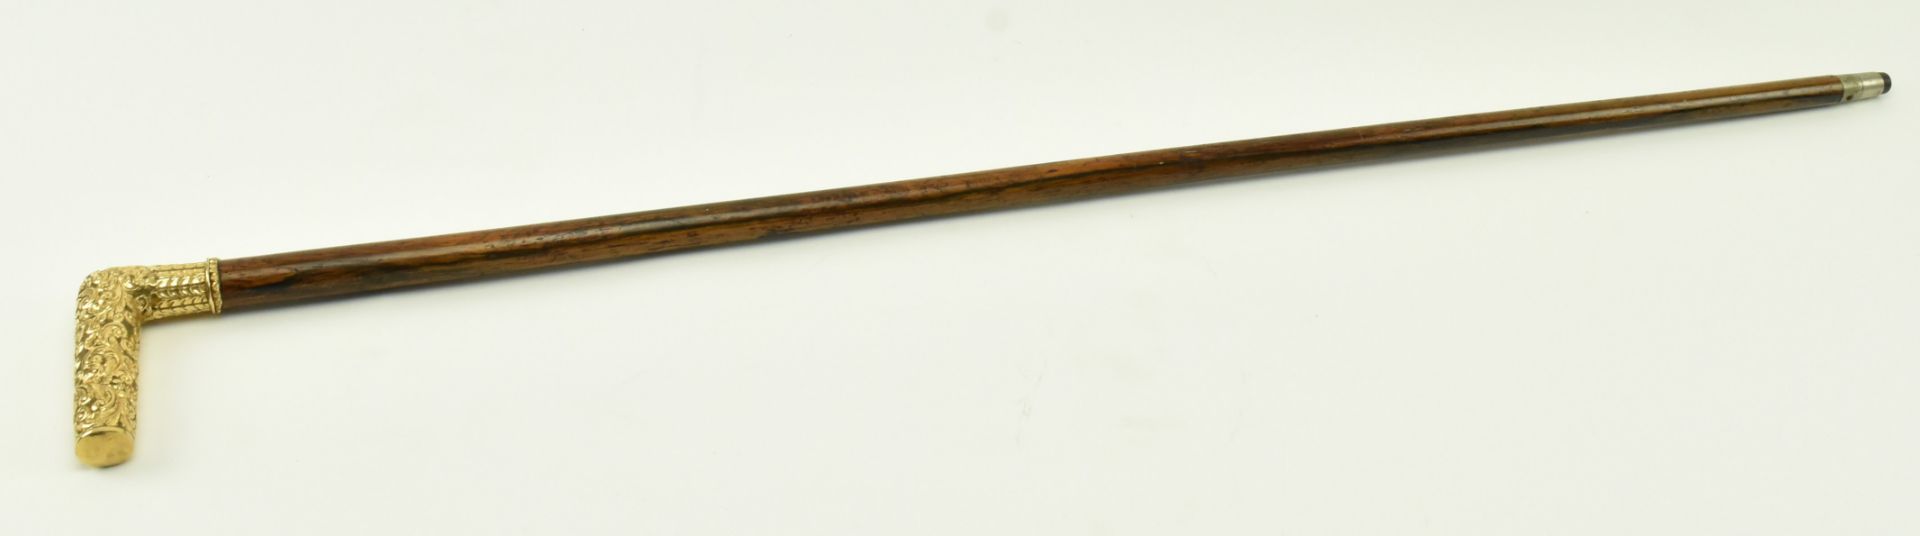 19TH CENTURY GOLD PLATED HANDLE OAK WALKING STICK - Image 3 of 5